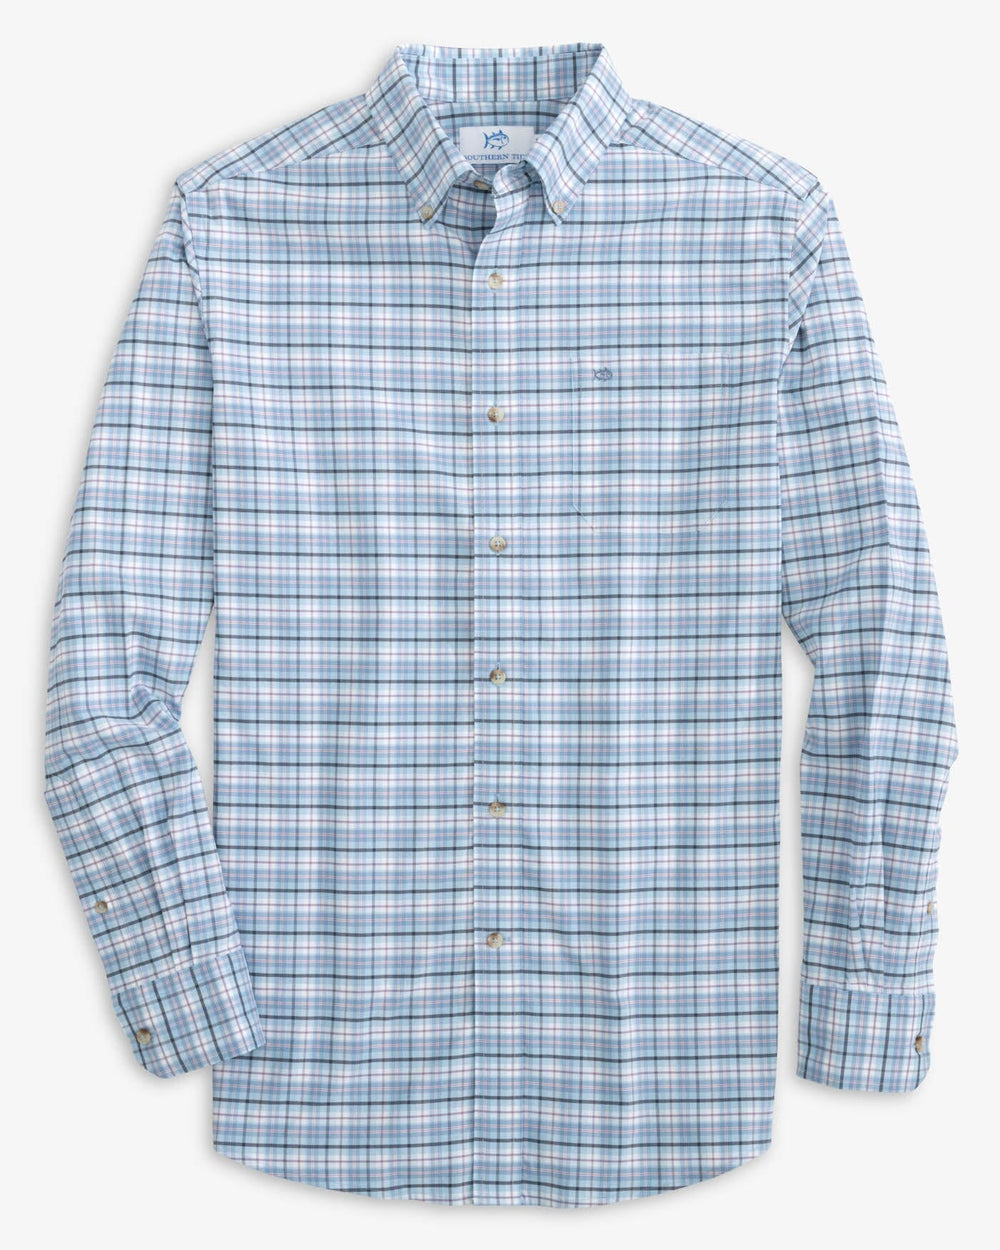 The front view of the Southern Tide Coastal Passage Patton Plaid Sport Shirts by Southern Tide - Dream Blue